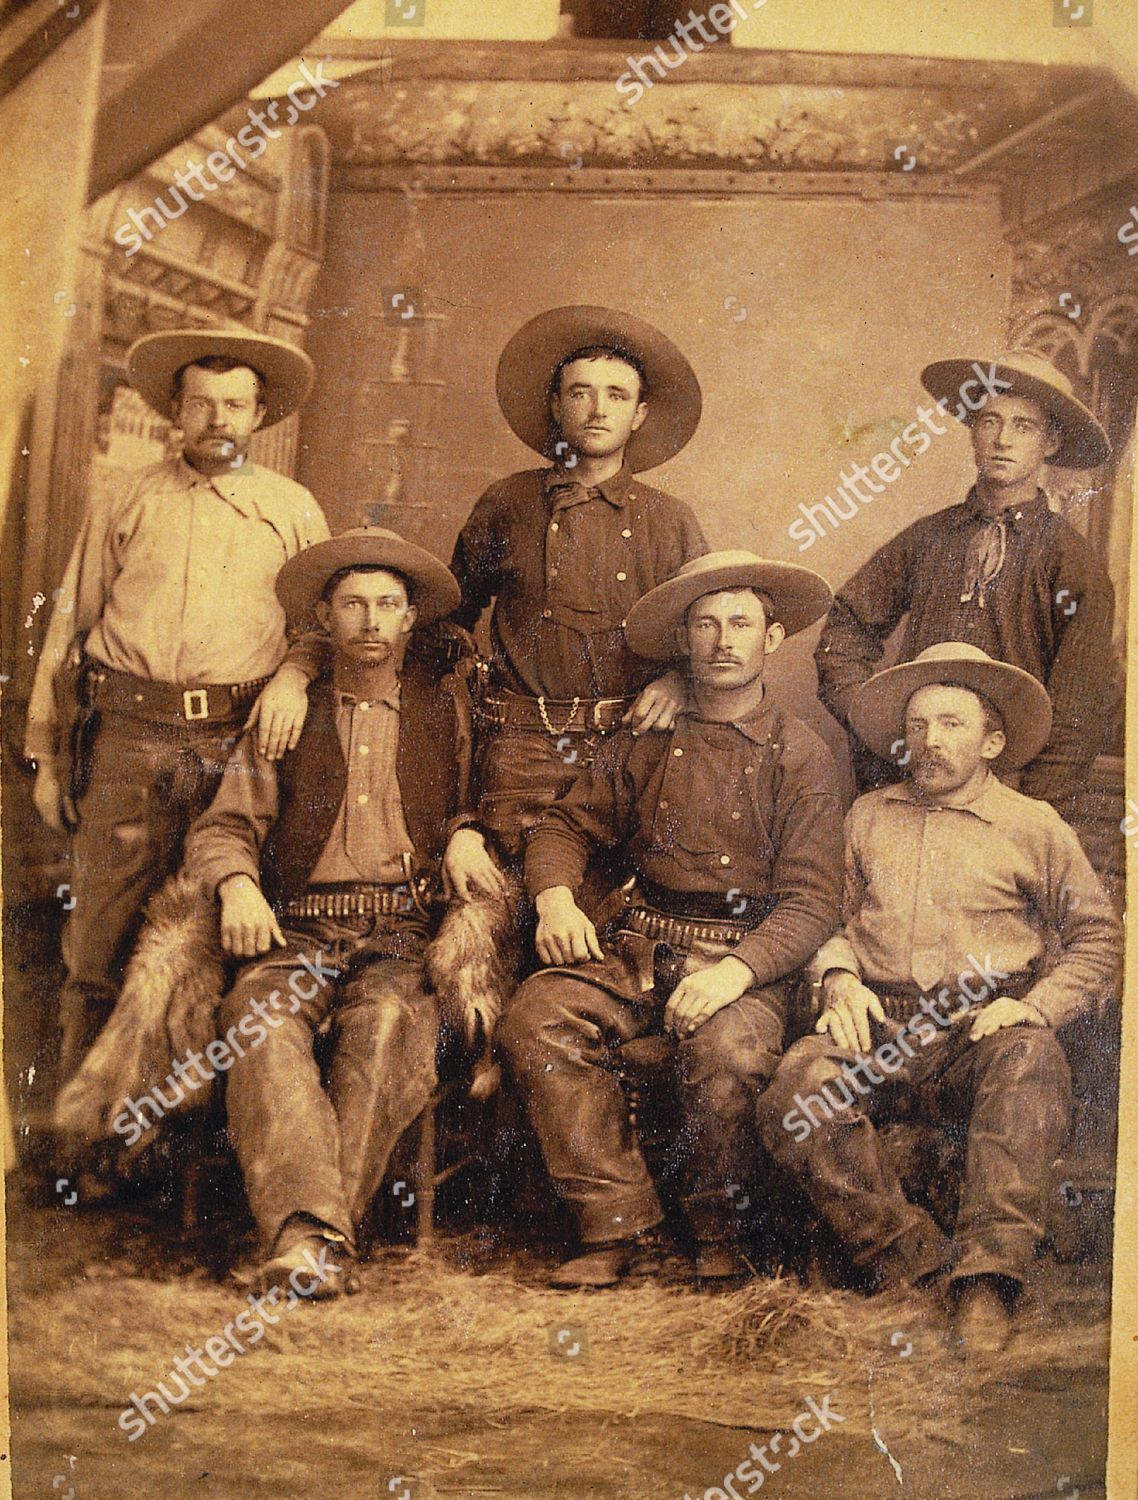 Arizona cowboys, 1880, dressed in the typical costume of the time, including low crown "Boss of the Plains" Stetsons, shotgun style chaps and vests, and some are wearing double-breasted or bib-front shirts. (standing, left to right) James Prusley, Walter Fife, James Maxwell; (seated, left to right) Billy Riggs, James McClure, Judge John Blake.